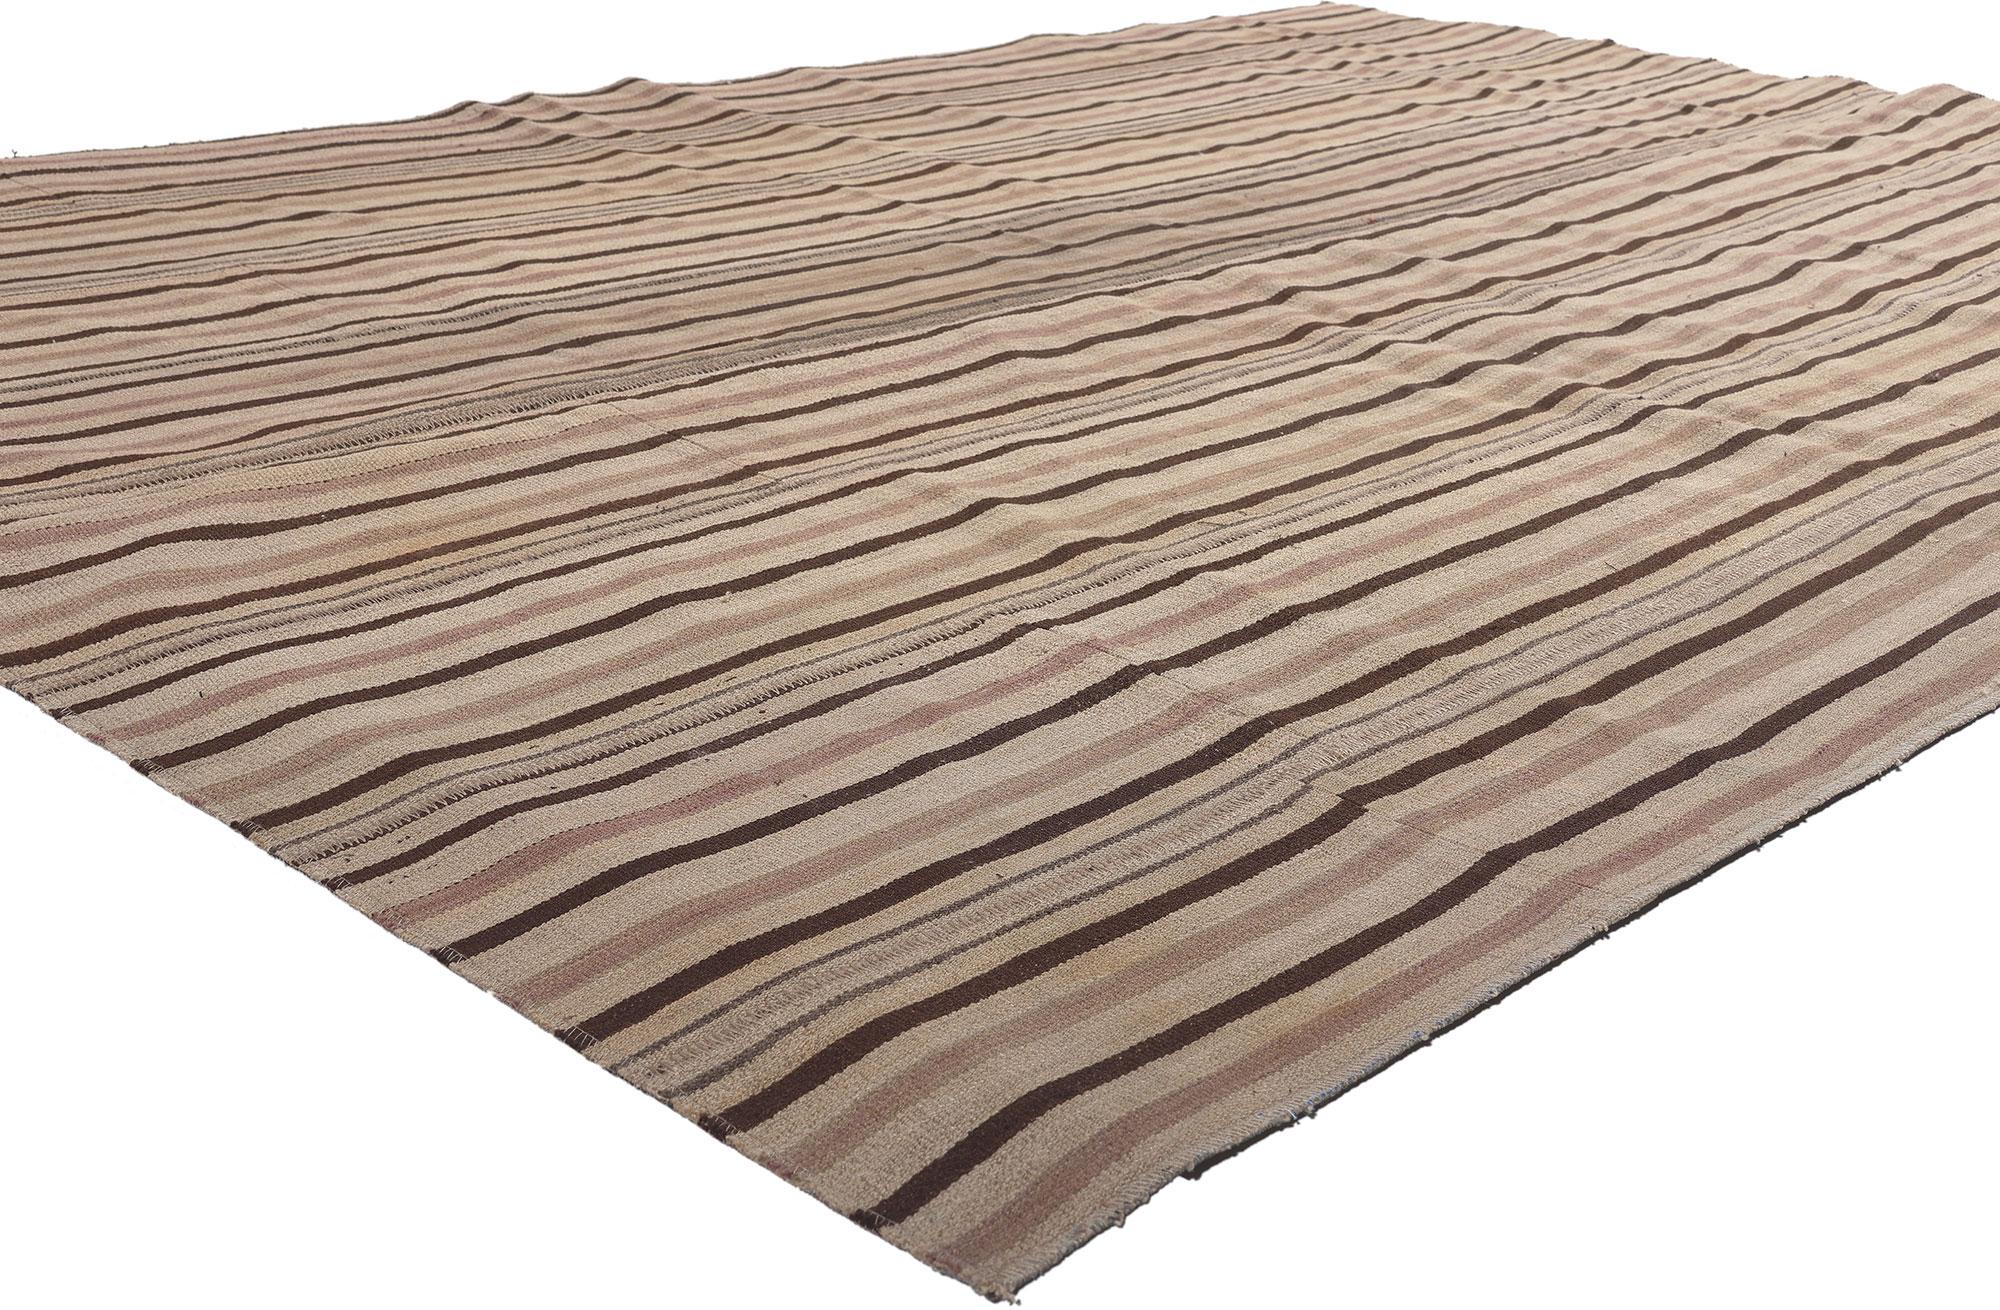 60802 Vintage Turkish Neutral Striped Kilim Rug, 06’07 x 09’07. Imbuing a sense of Wabi-Sabi grace into the realm of earth-tone elegance, this handwoven wool vintage Turkish striped kilim rug seamlessly intertwines modern style with rugged beauty.